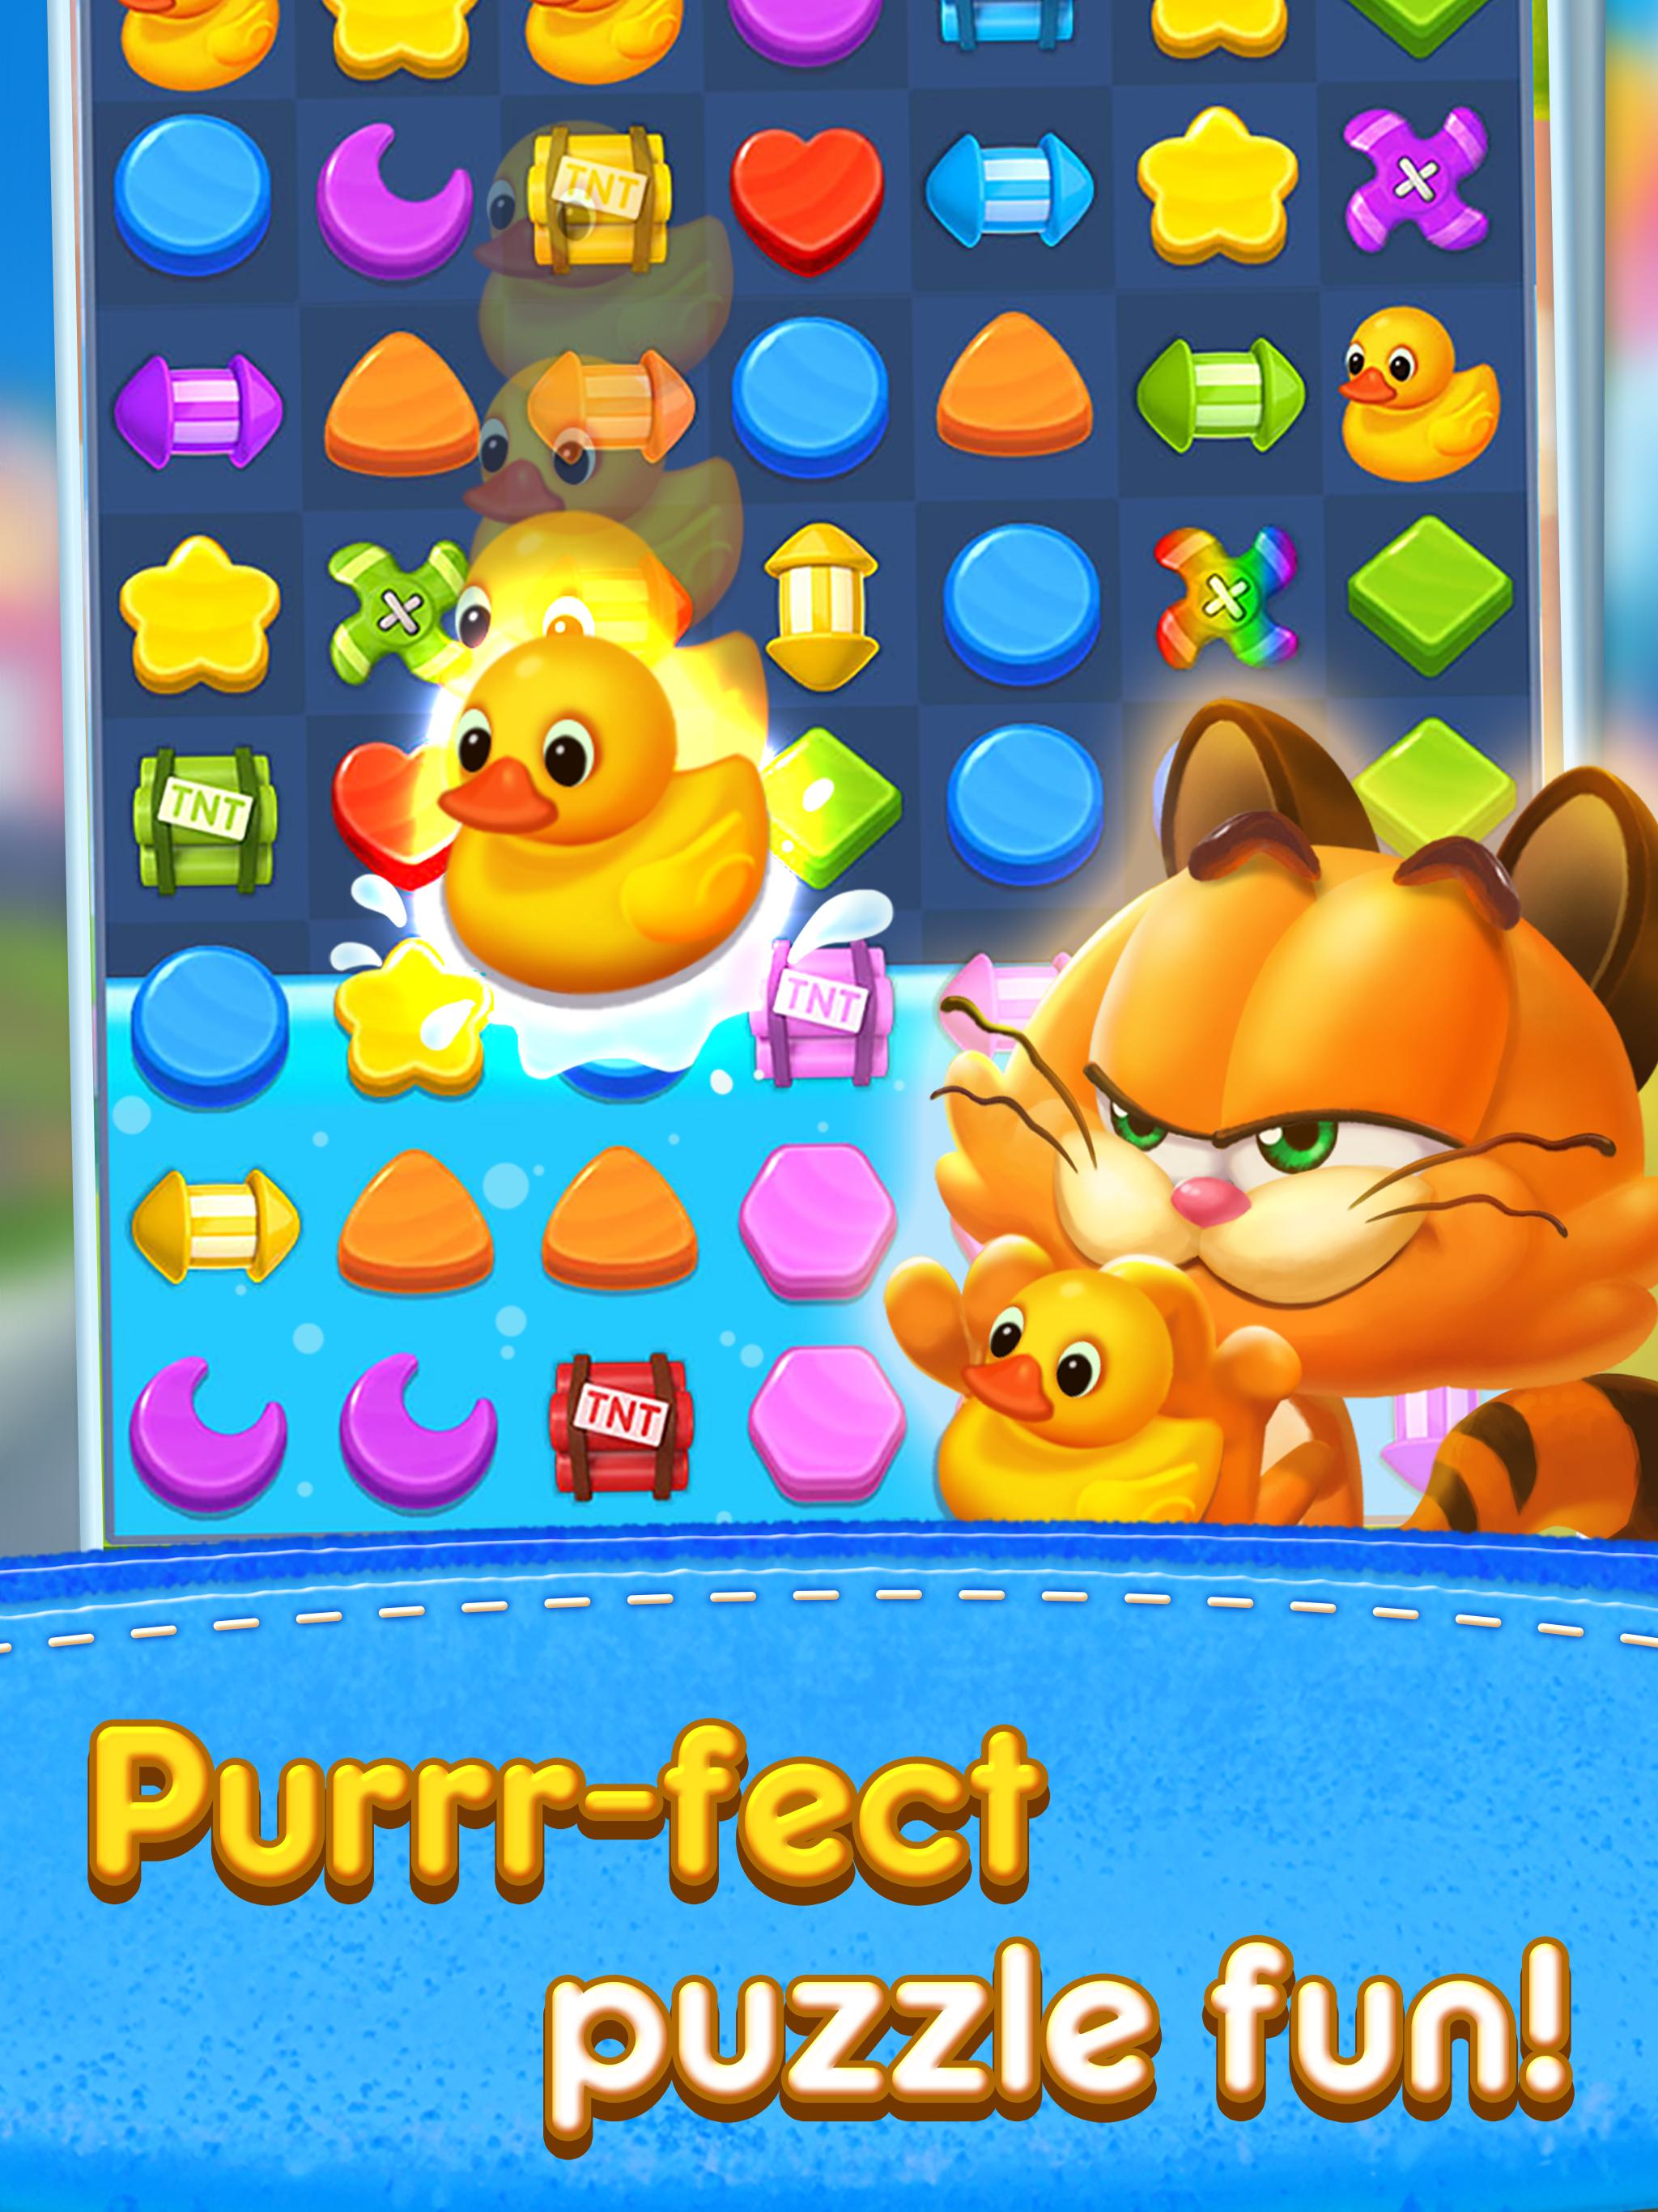 Magic Cat Match for Android - APK Download